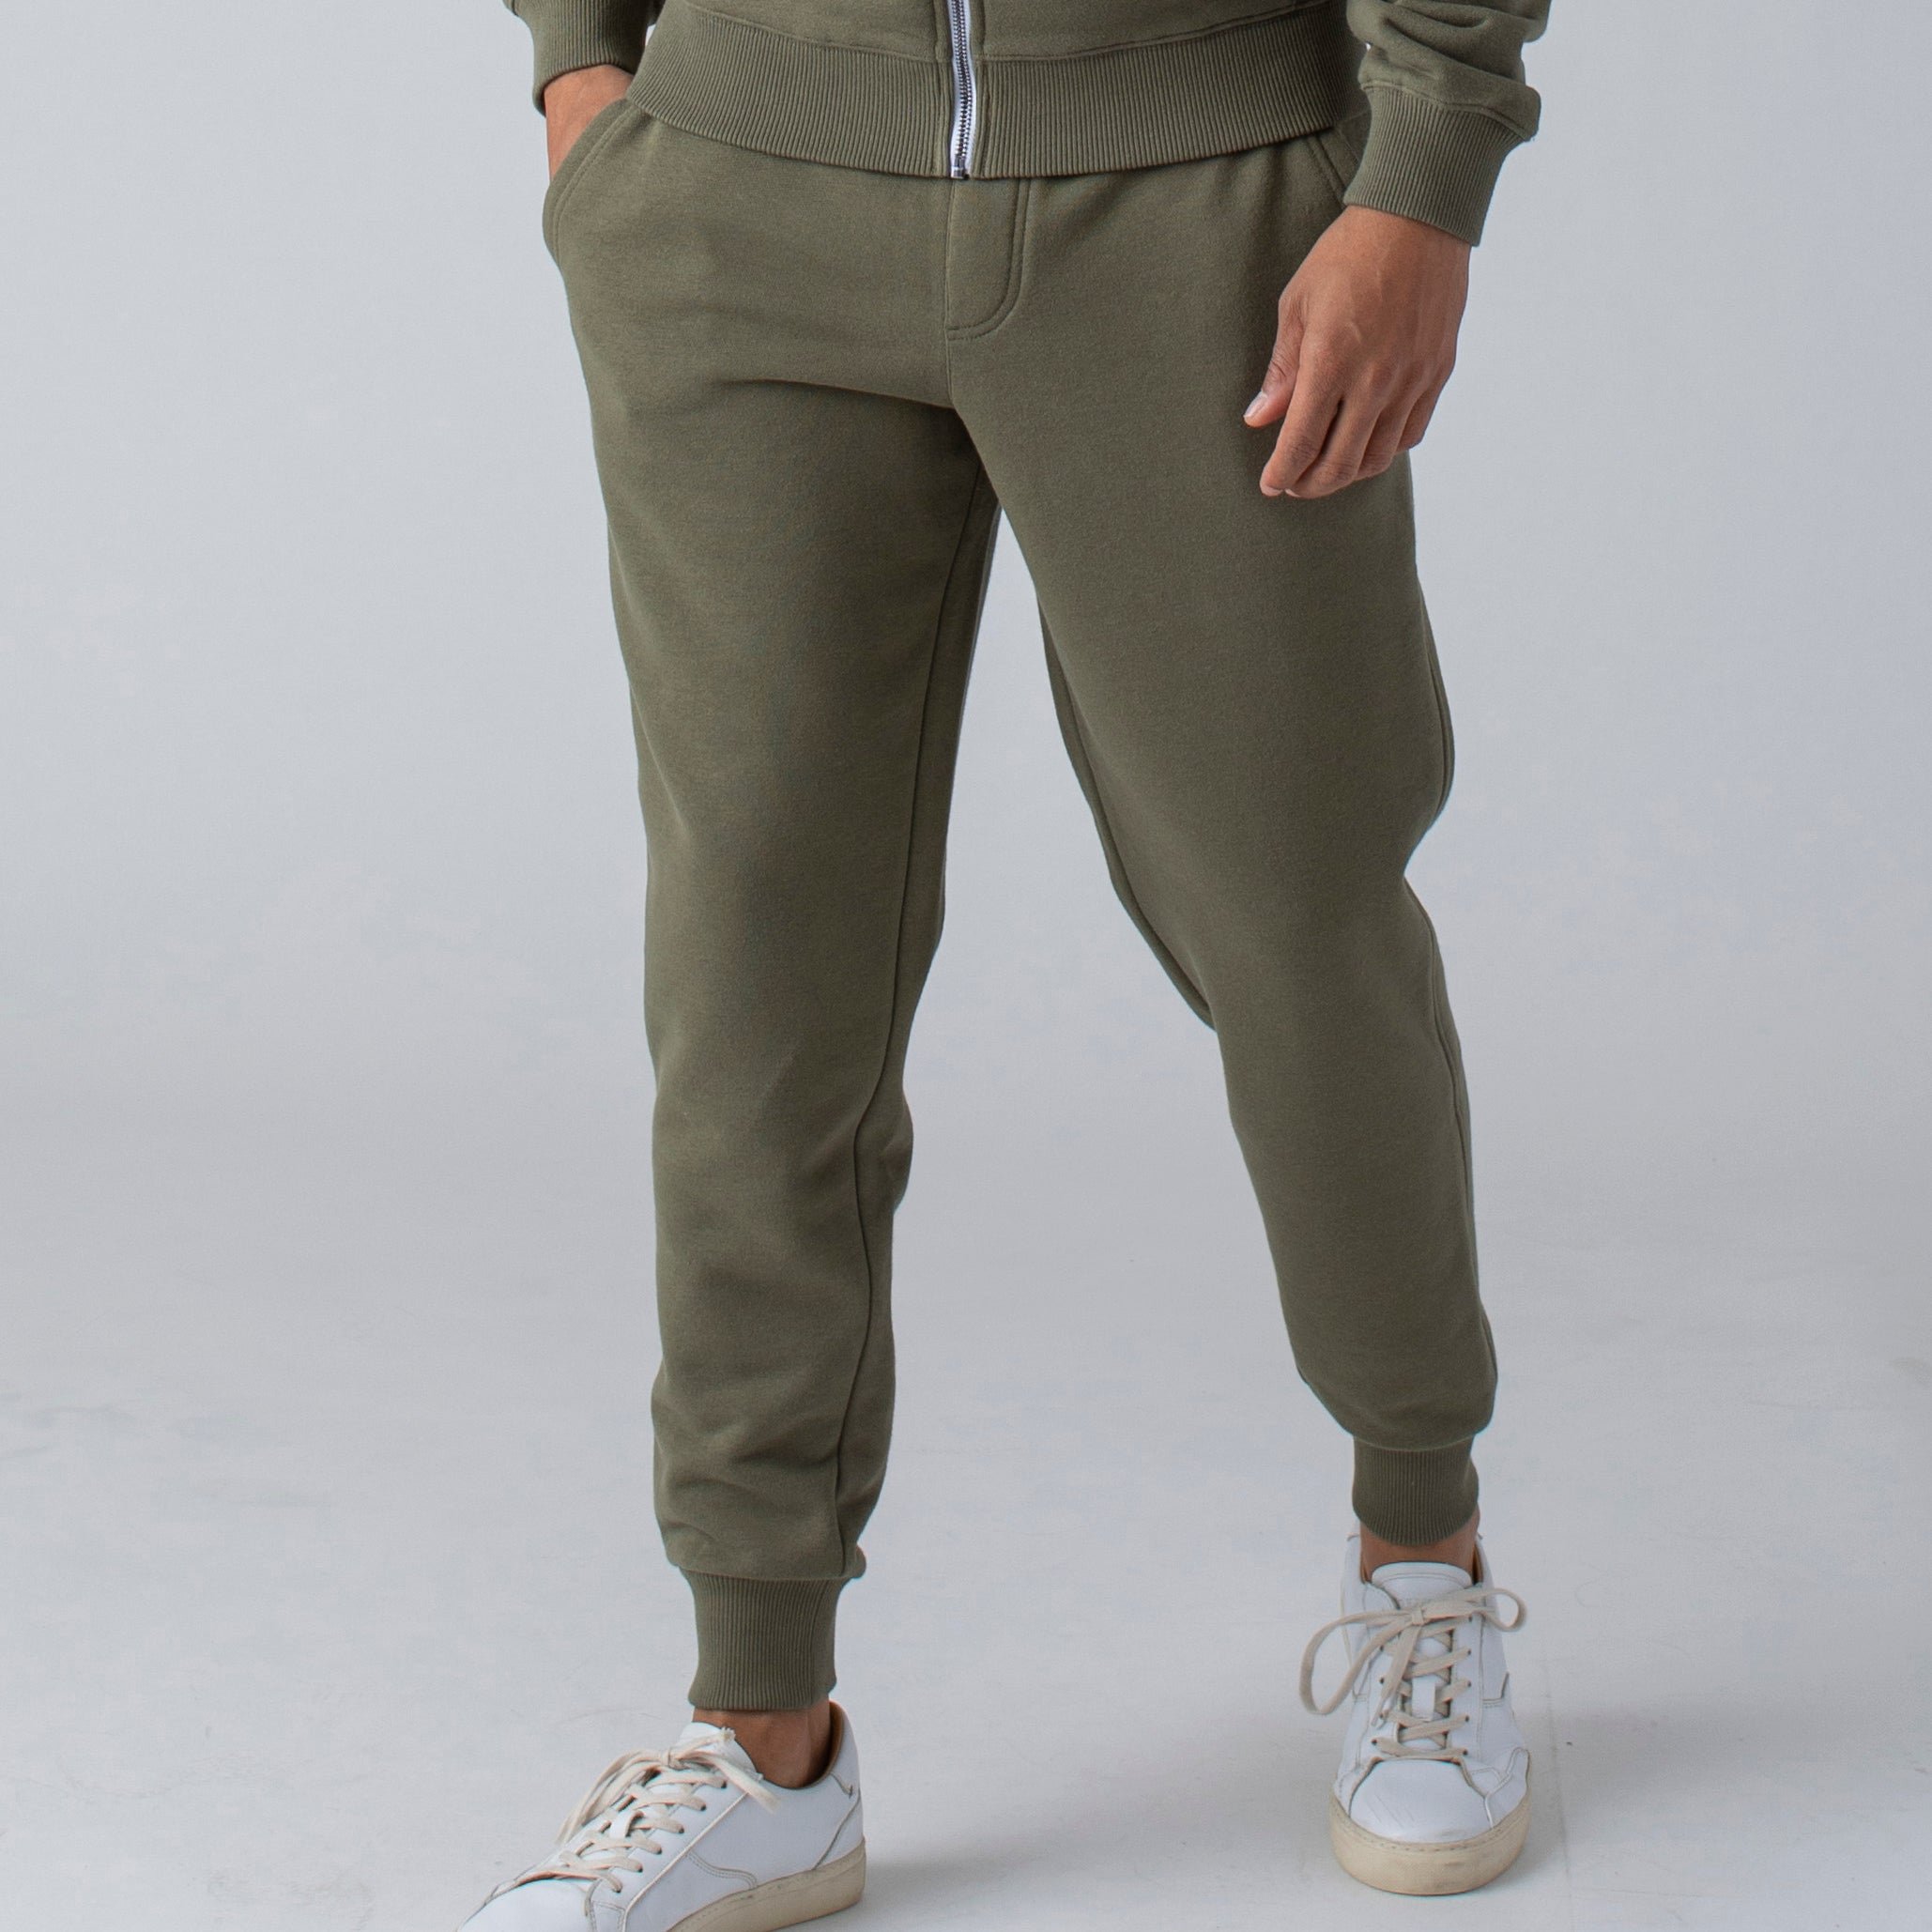 Military Green Fleece Pullover Hoodie and Jogger Set